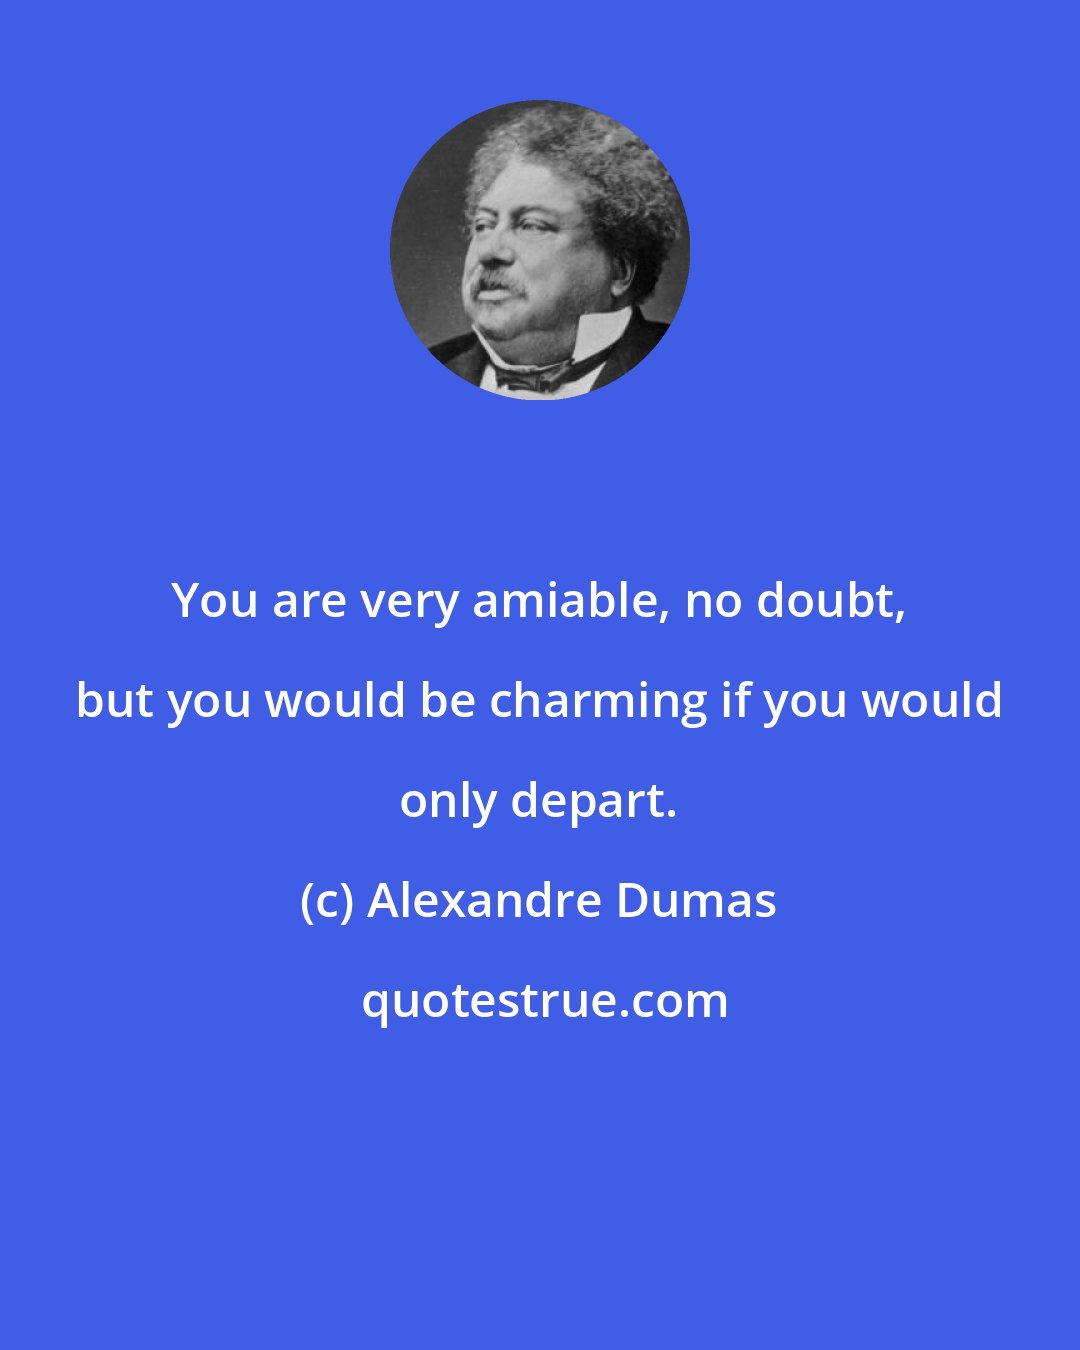 Alexandre Dumas: You are very amiable, no doubt, but you would be charming if you would only depart.